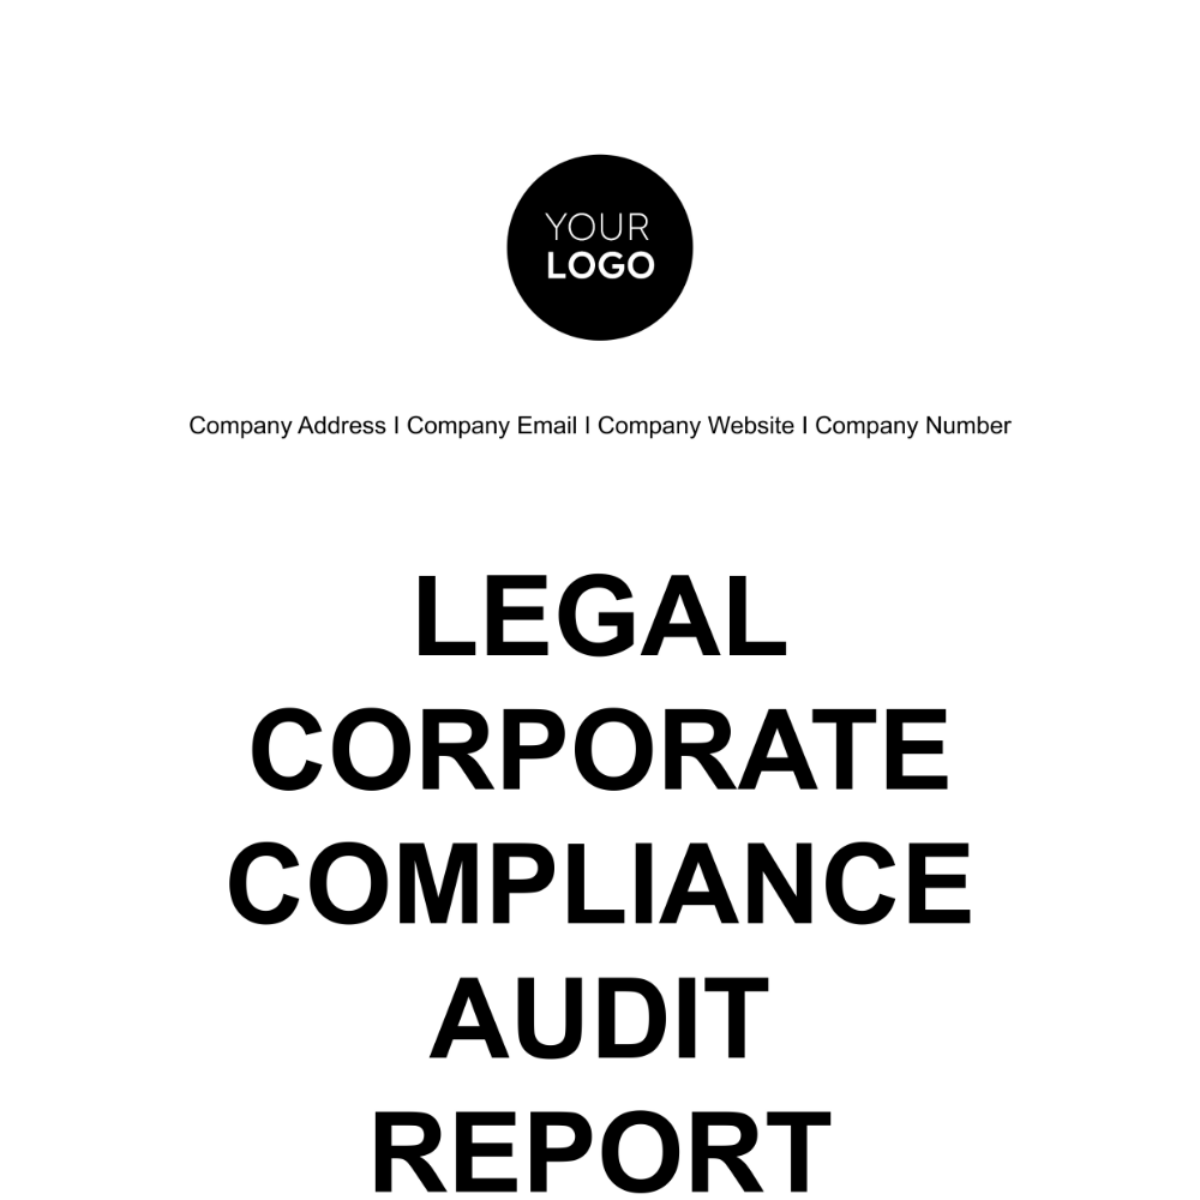 Free Legal Corporate Compliance Audit Report Template